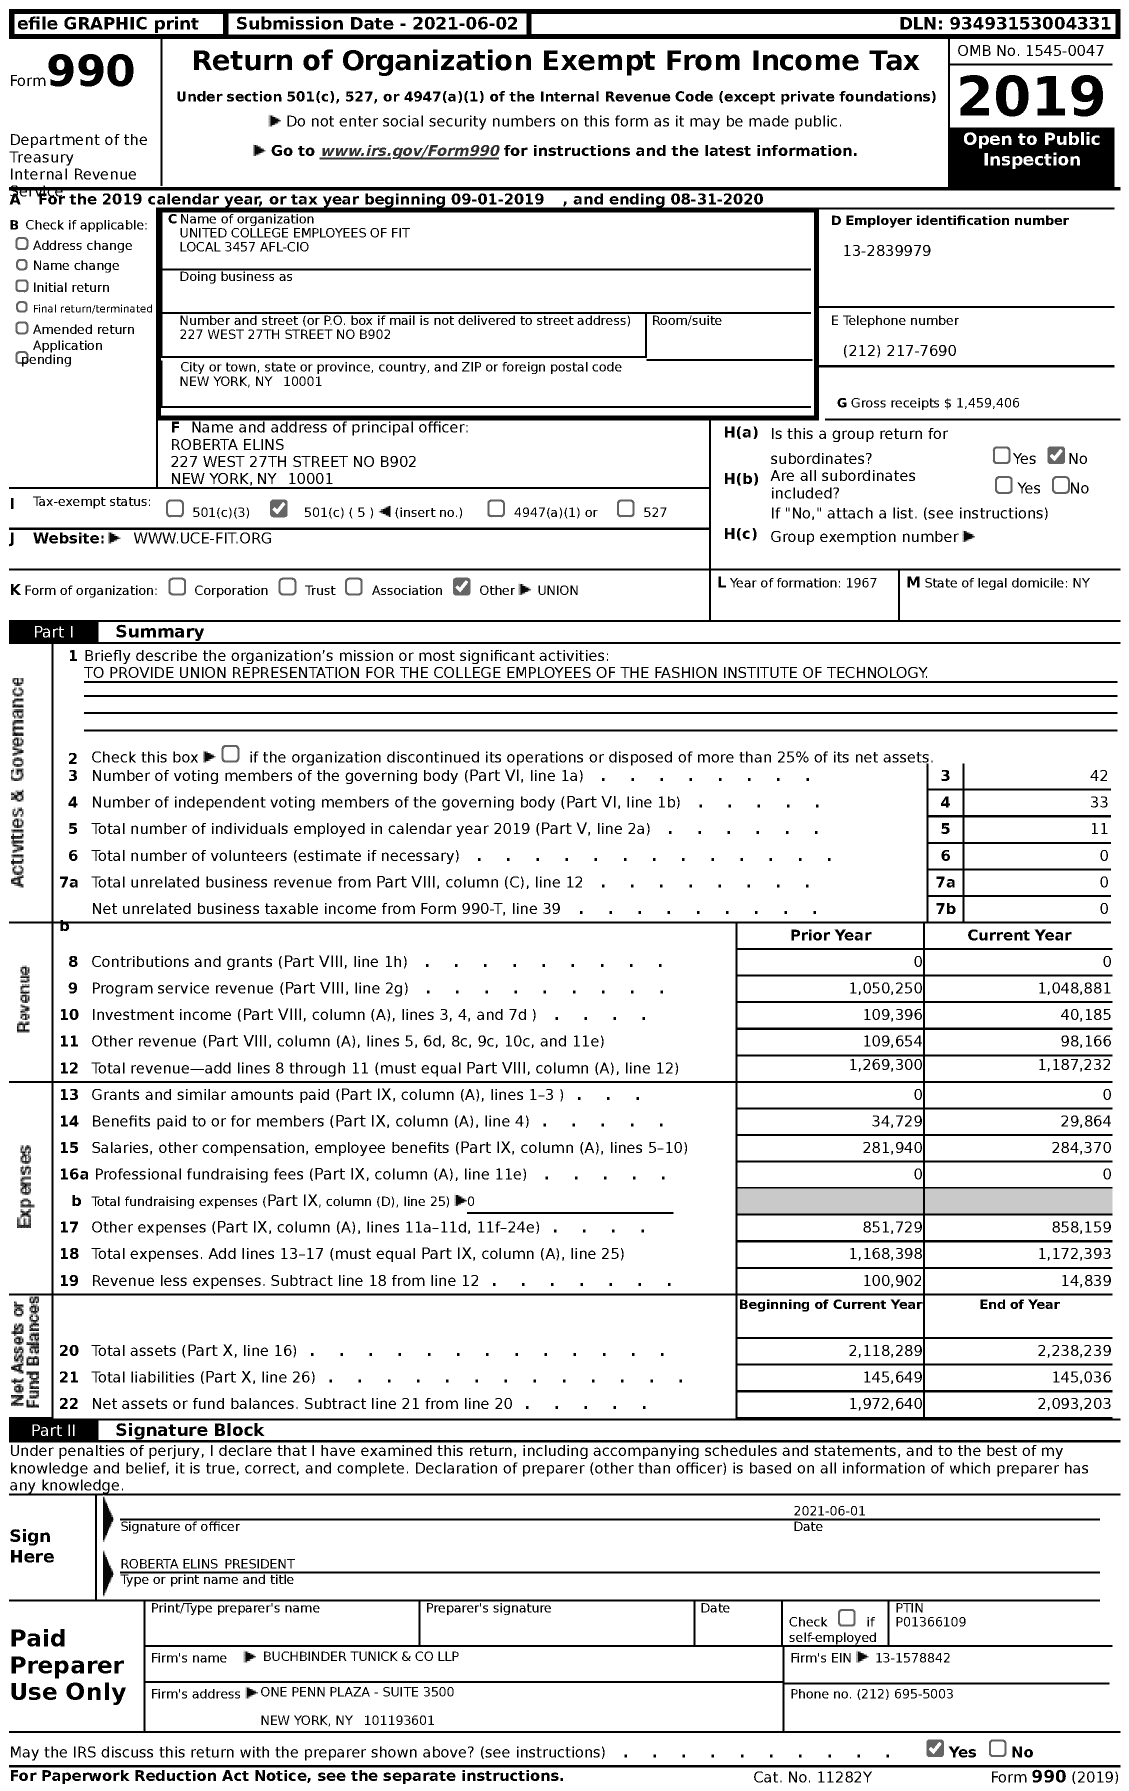 Image of first page of 2019 Form 990 for American Federation of Teachers - 3457 United College Employees of Fi